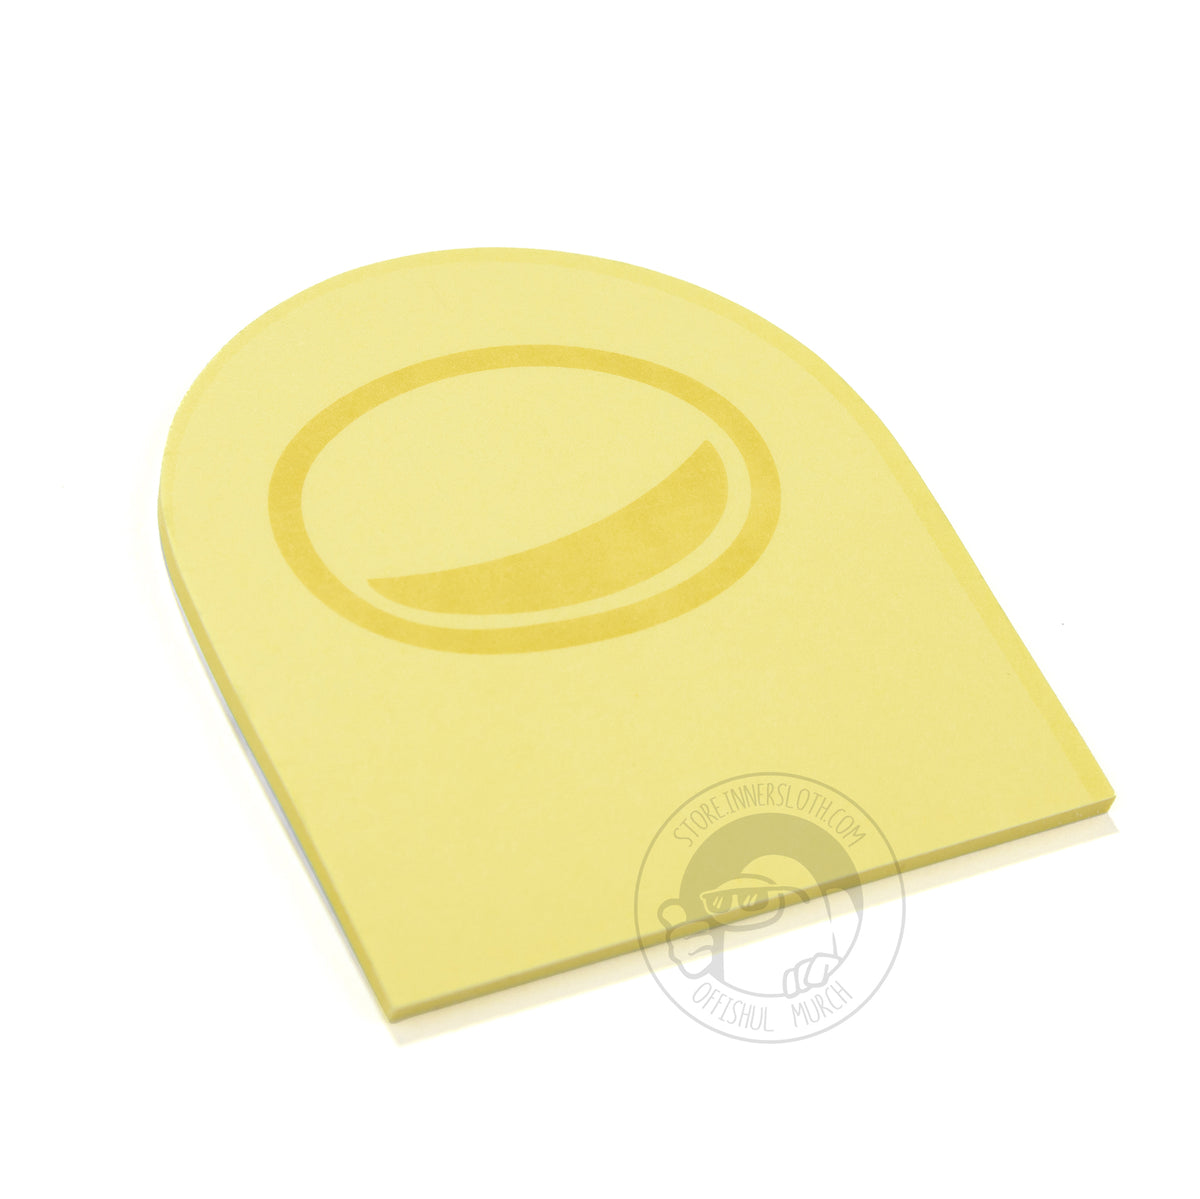 A product photo of the yellow pack of Crewmate Post-It Notes placed diagonally.